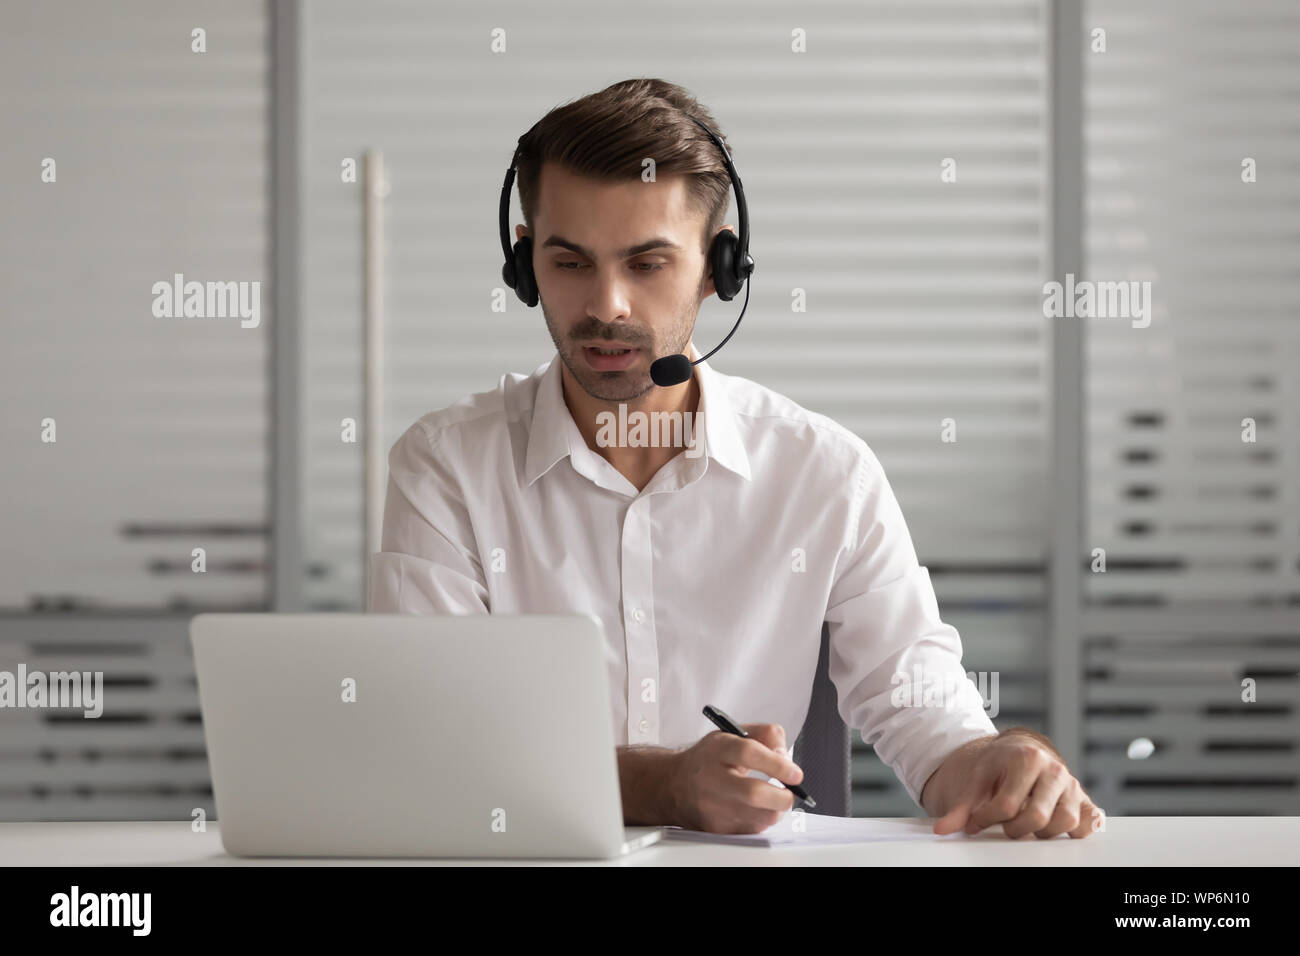 Busy concentrated manager wearing headphones discussing project ideas with client. Stock Photo